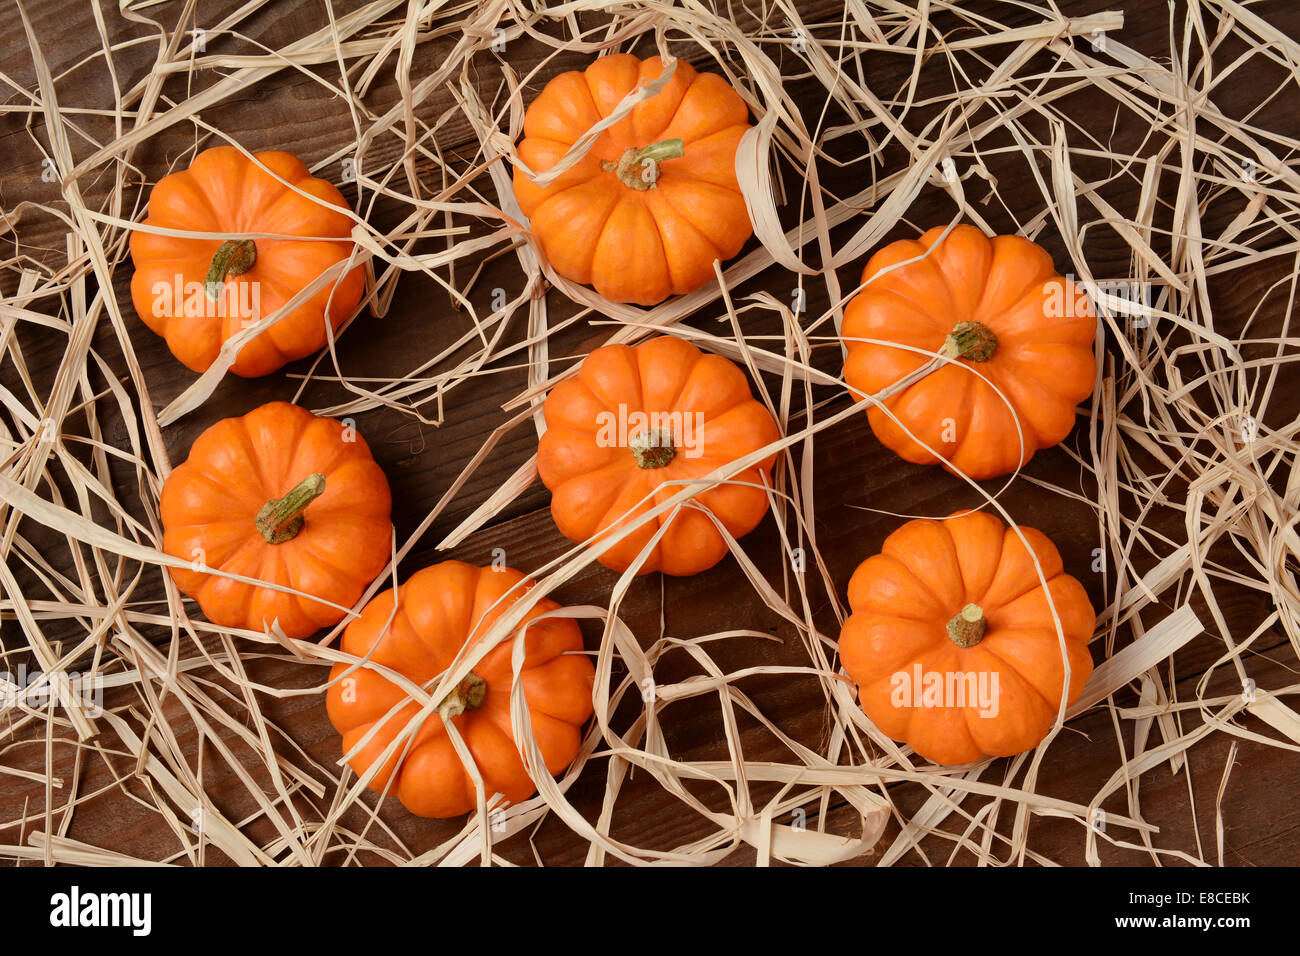 A group of mini pumpkins on a wood rustic table scattered with straw. High angle shot in horizontal format. Stock Photo